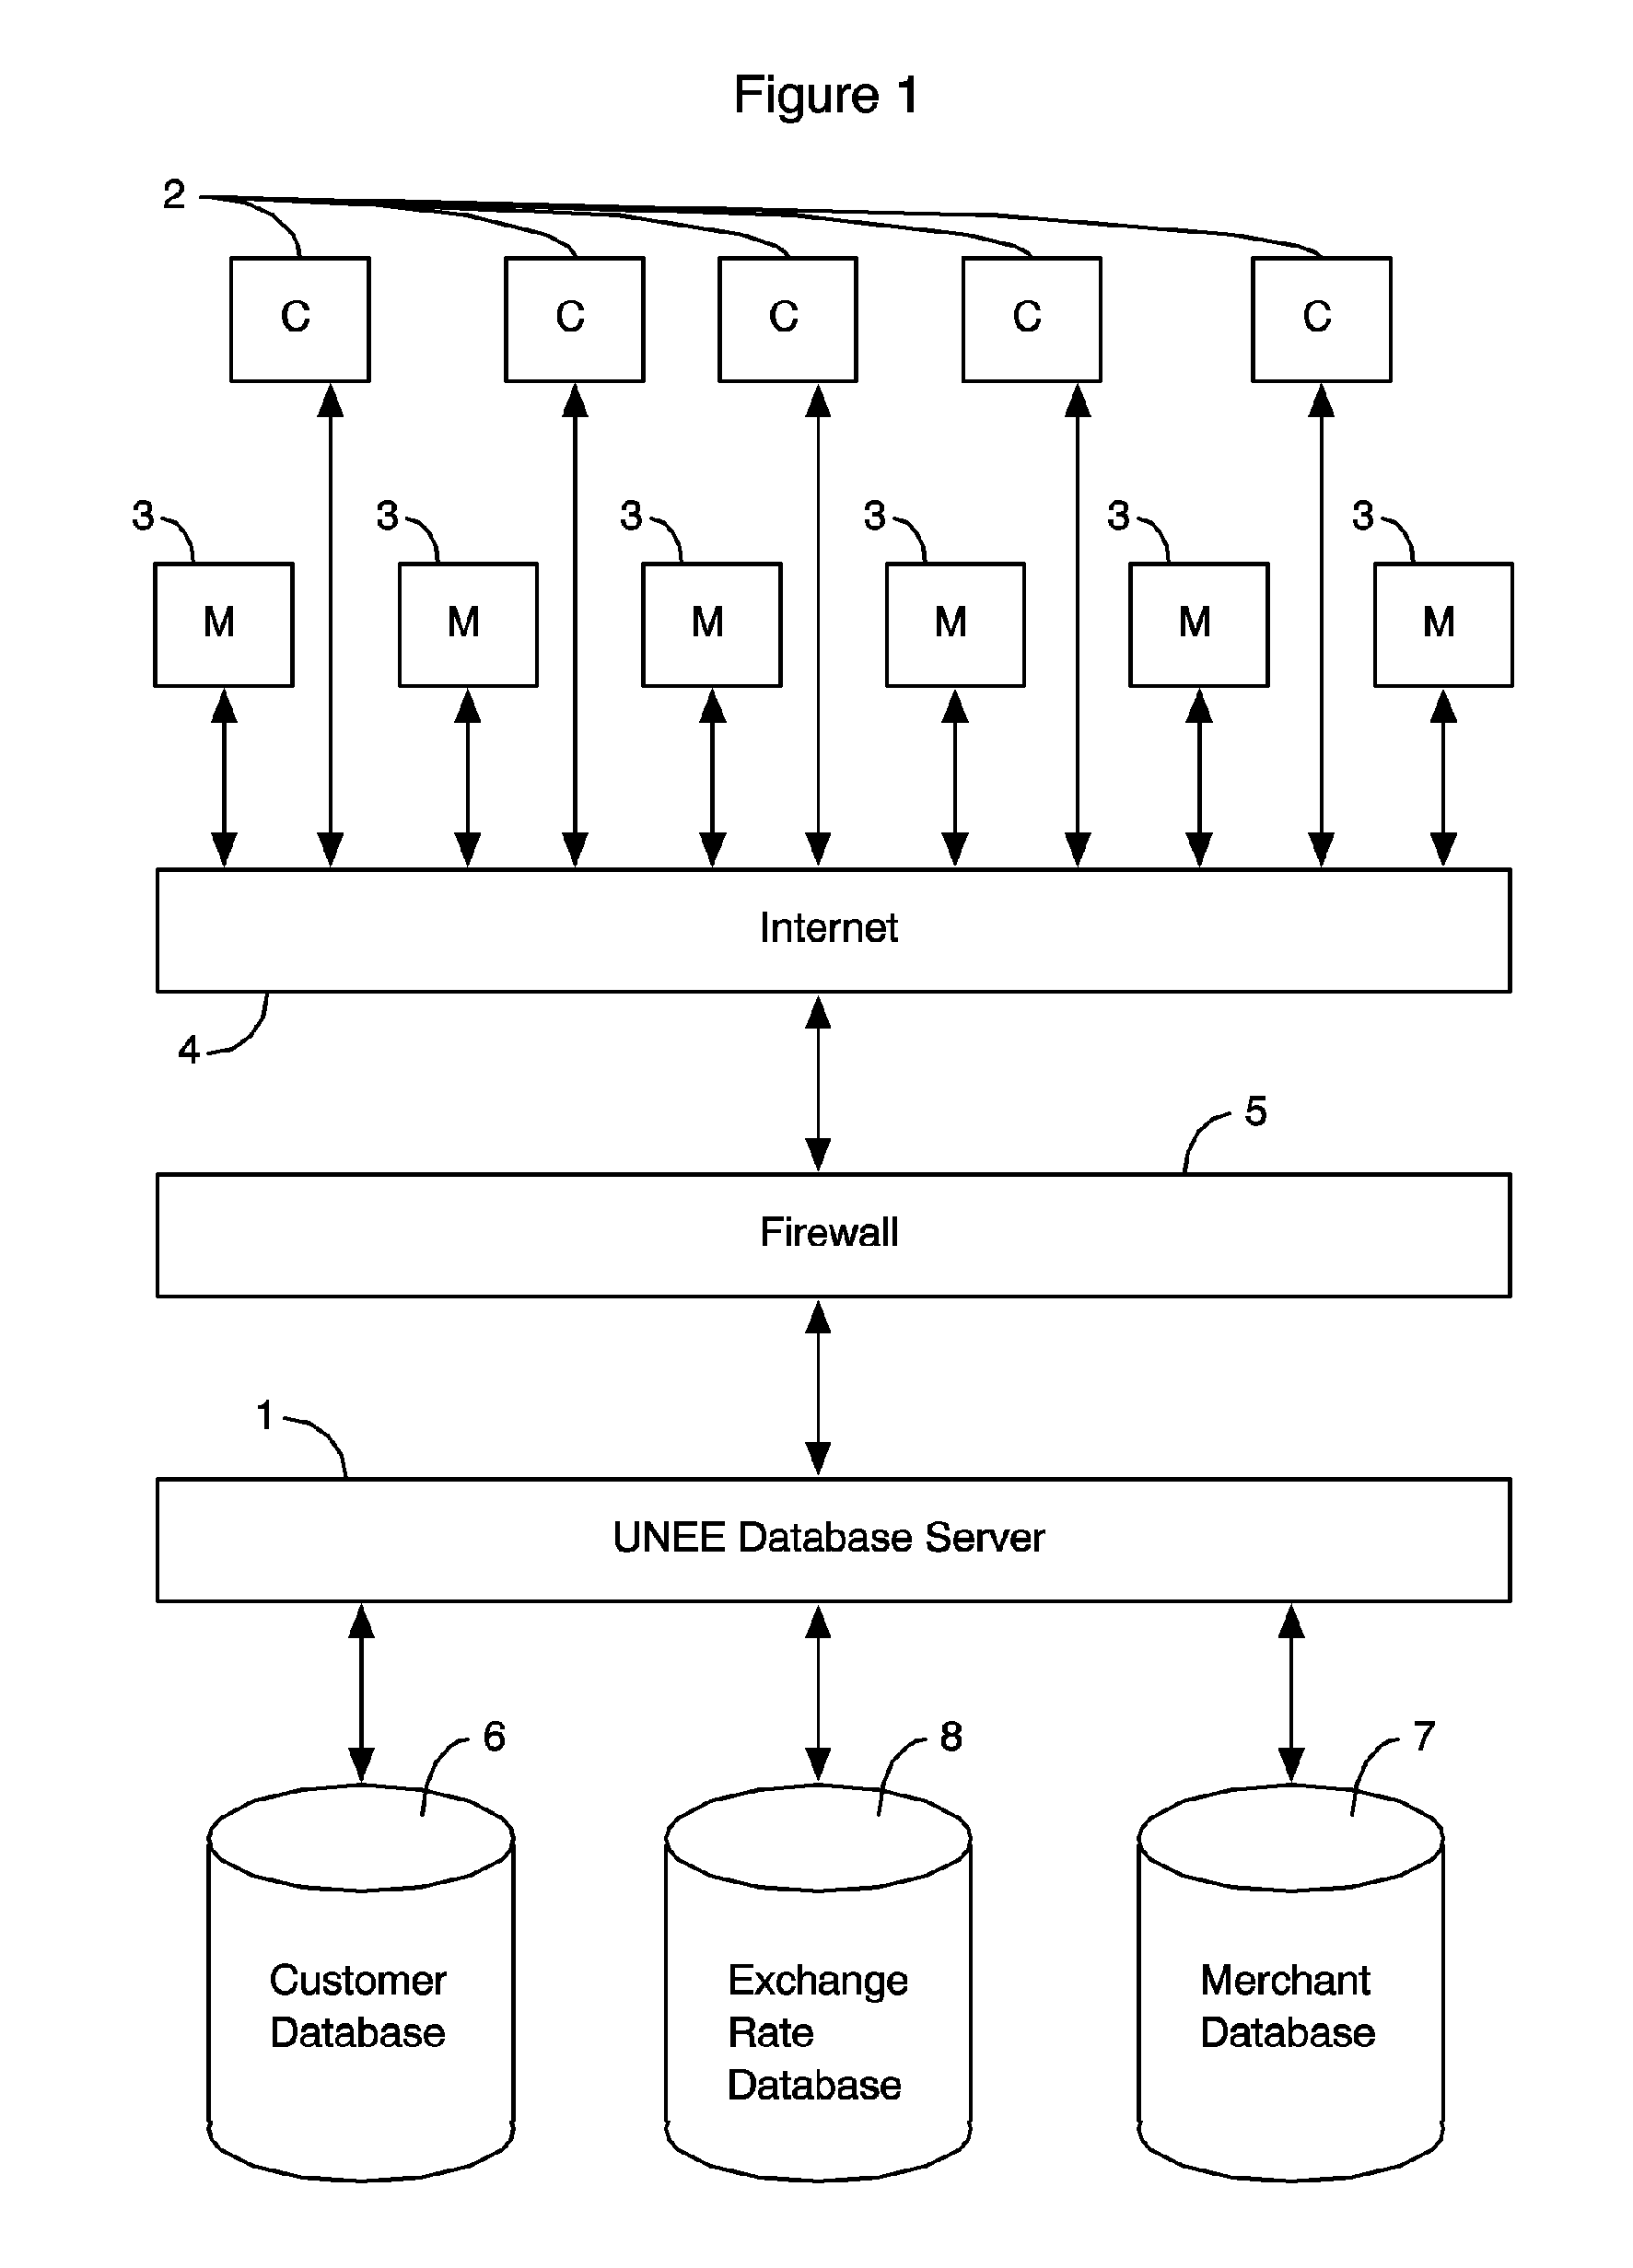 Apparatus and Method for Creating and Using Electronic Currency on Global Computer Networks